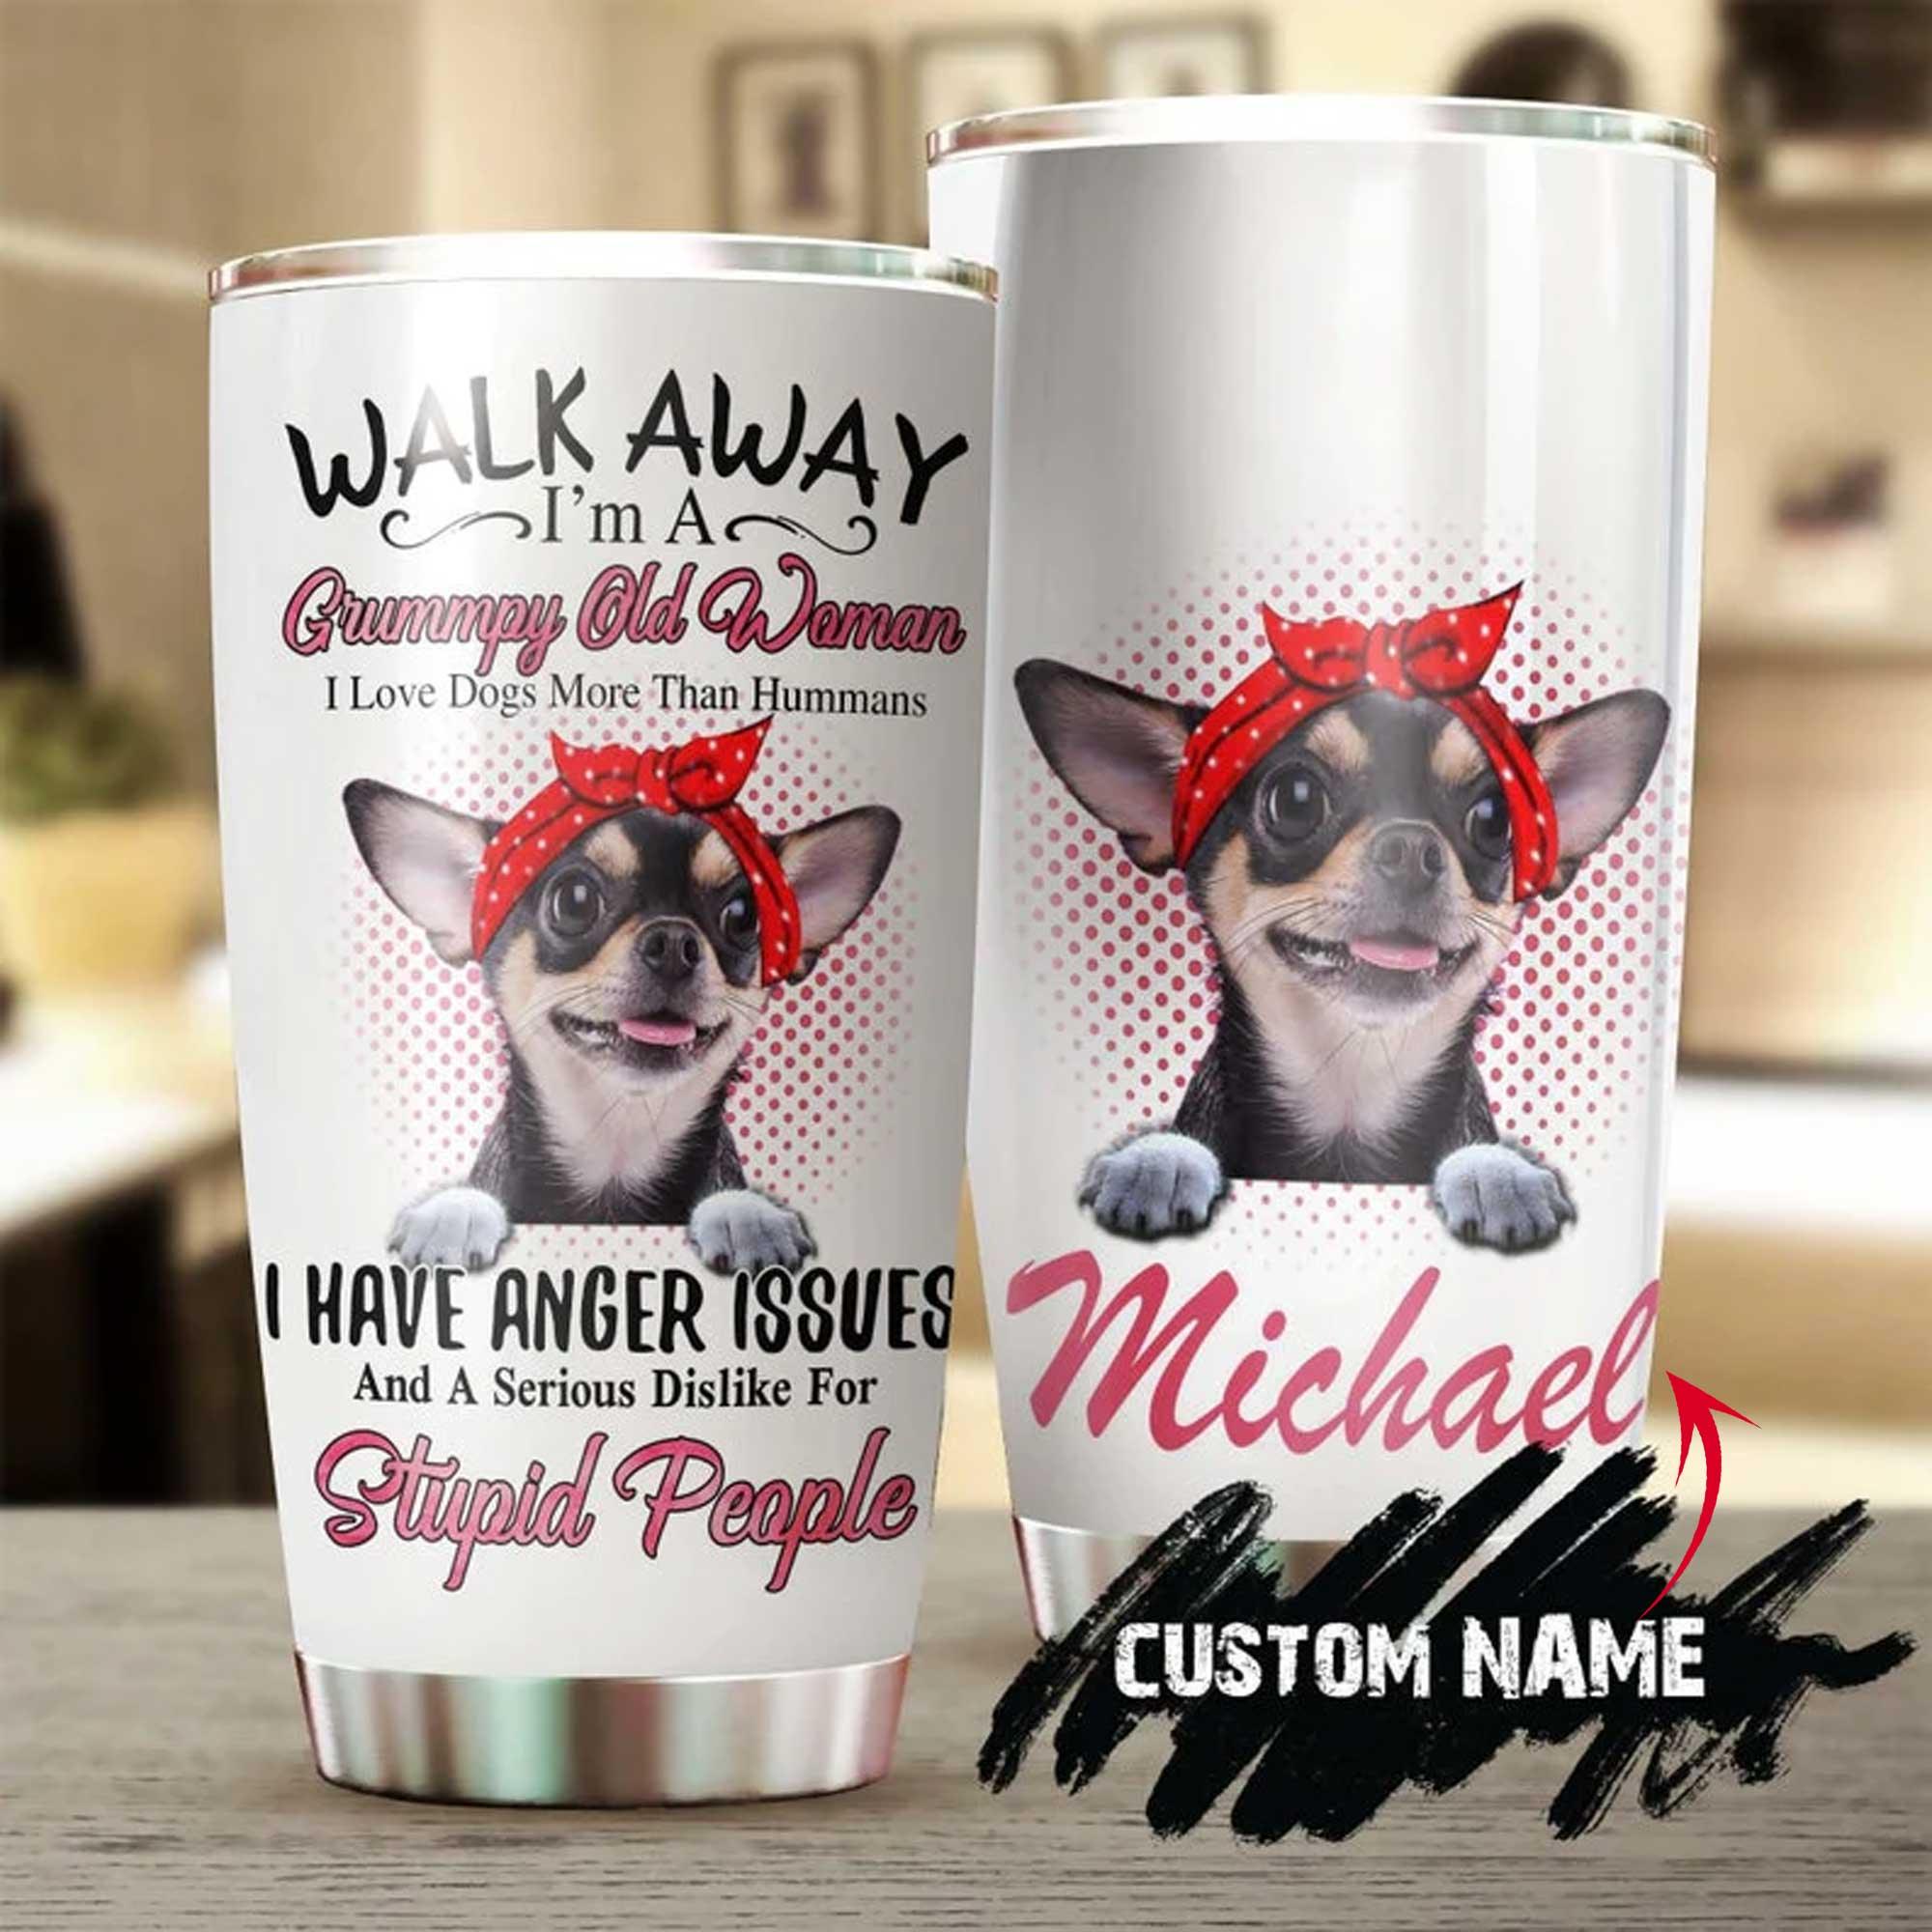 Chihuahua Personalized Mother's Day Gift Tumbler - Gift For Dog Lover, Dog Mom, Dog Dad, Dog Lady - Old Woman Loves Dogs Tumbler - Amzanimalsgift